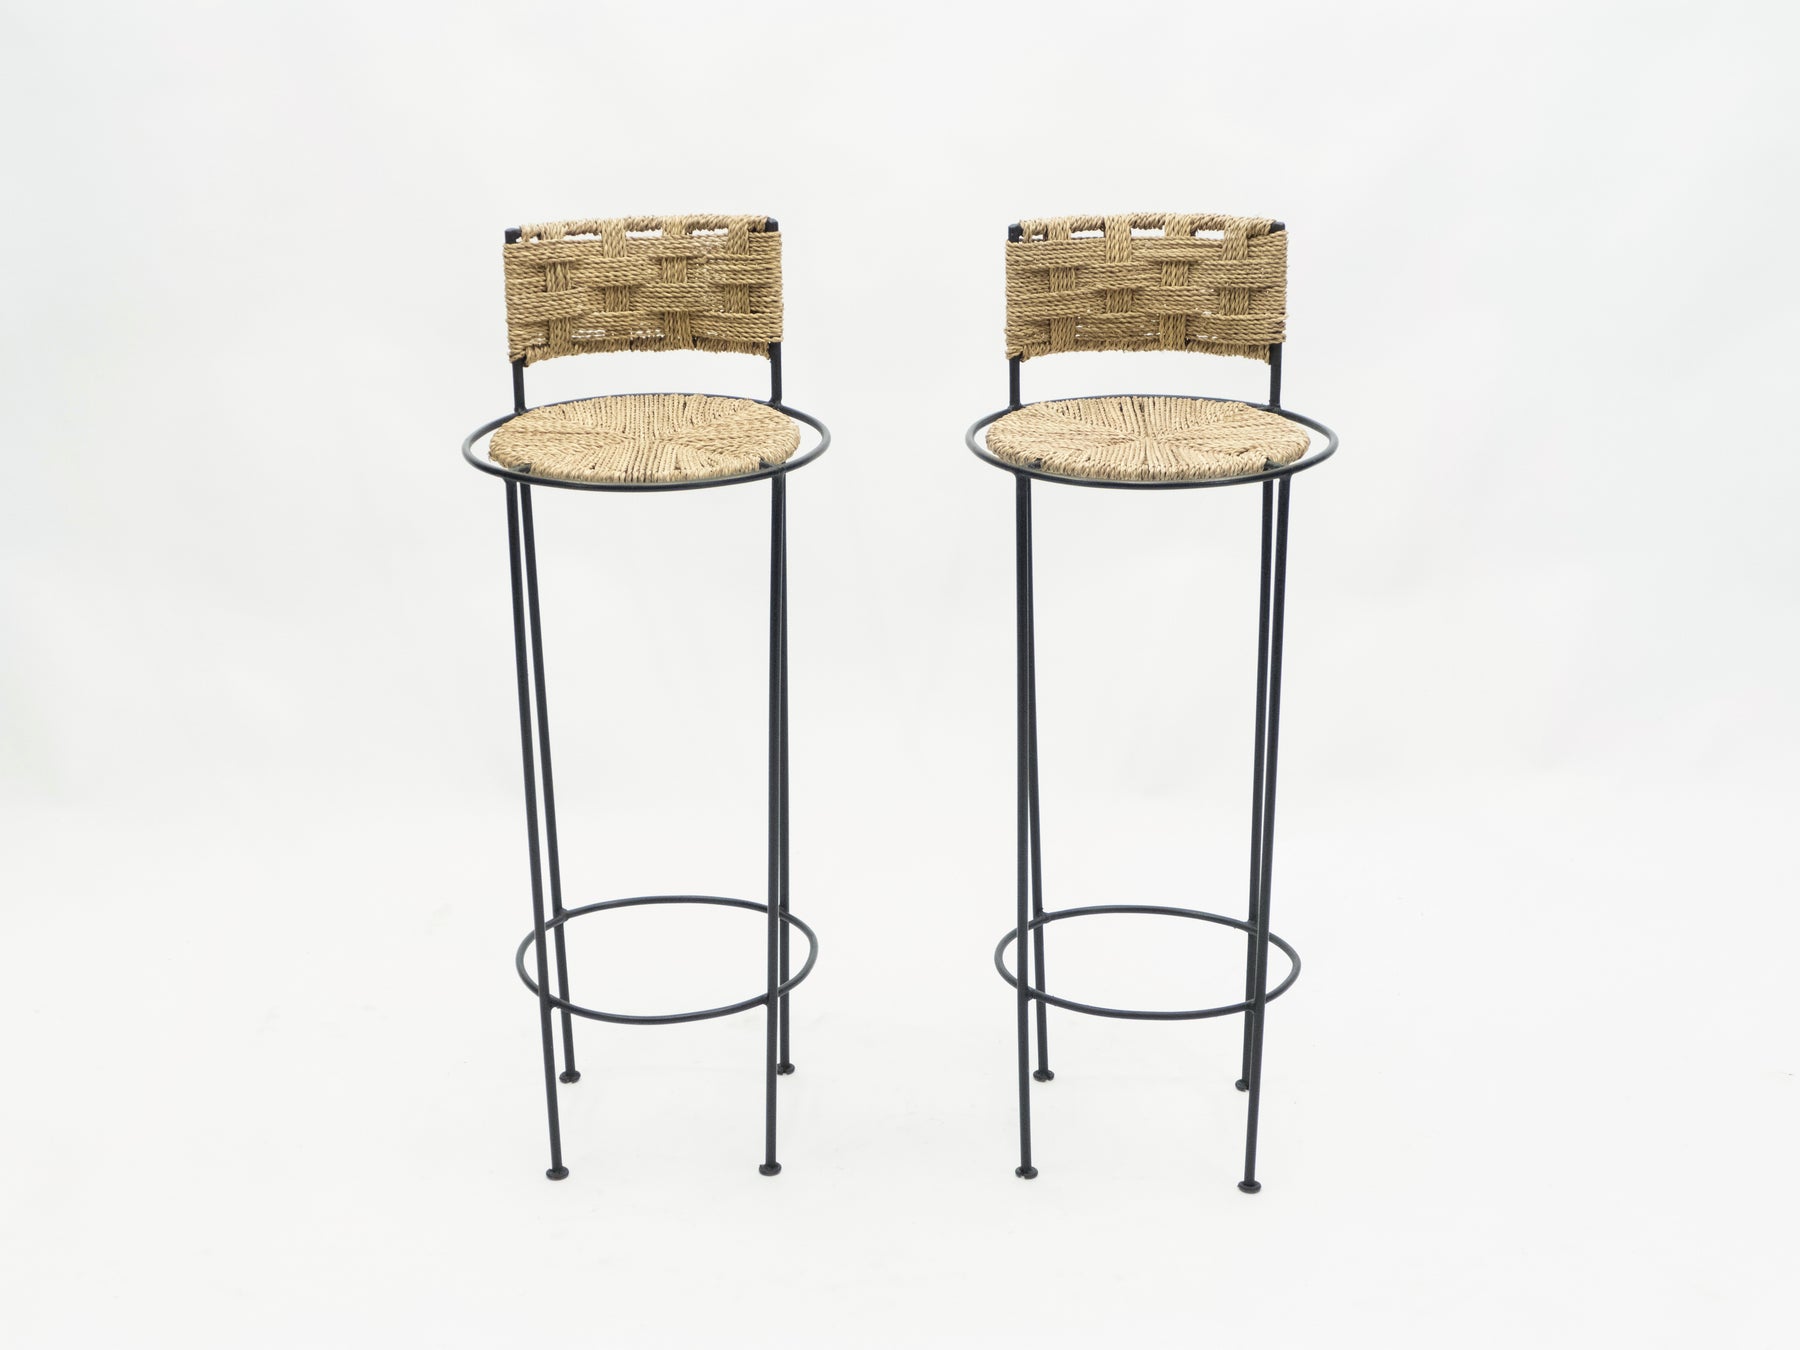 Pair of french bar stools rope and metal by Audoux Minet 1950s